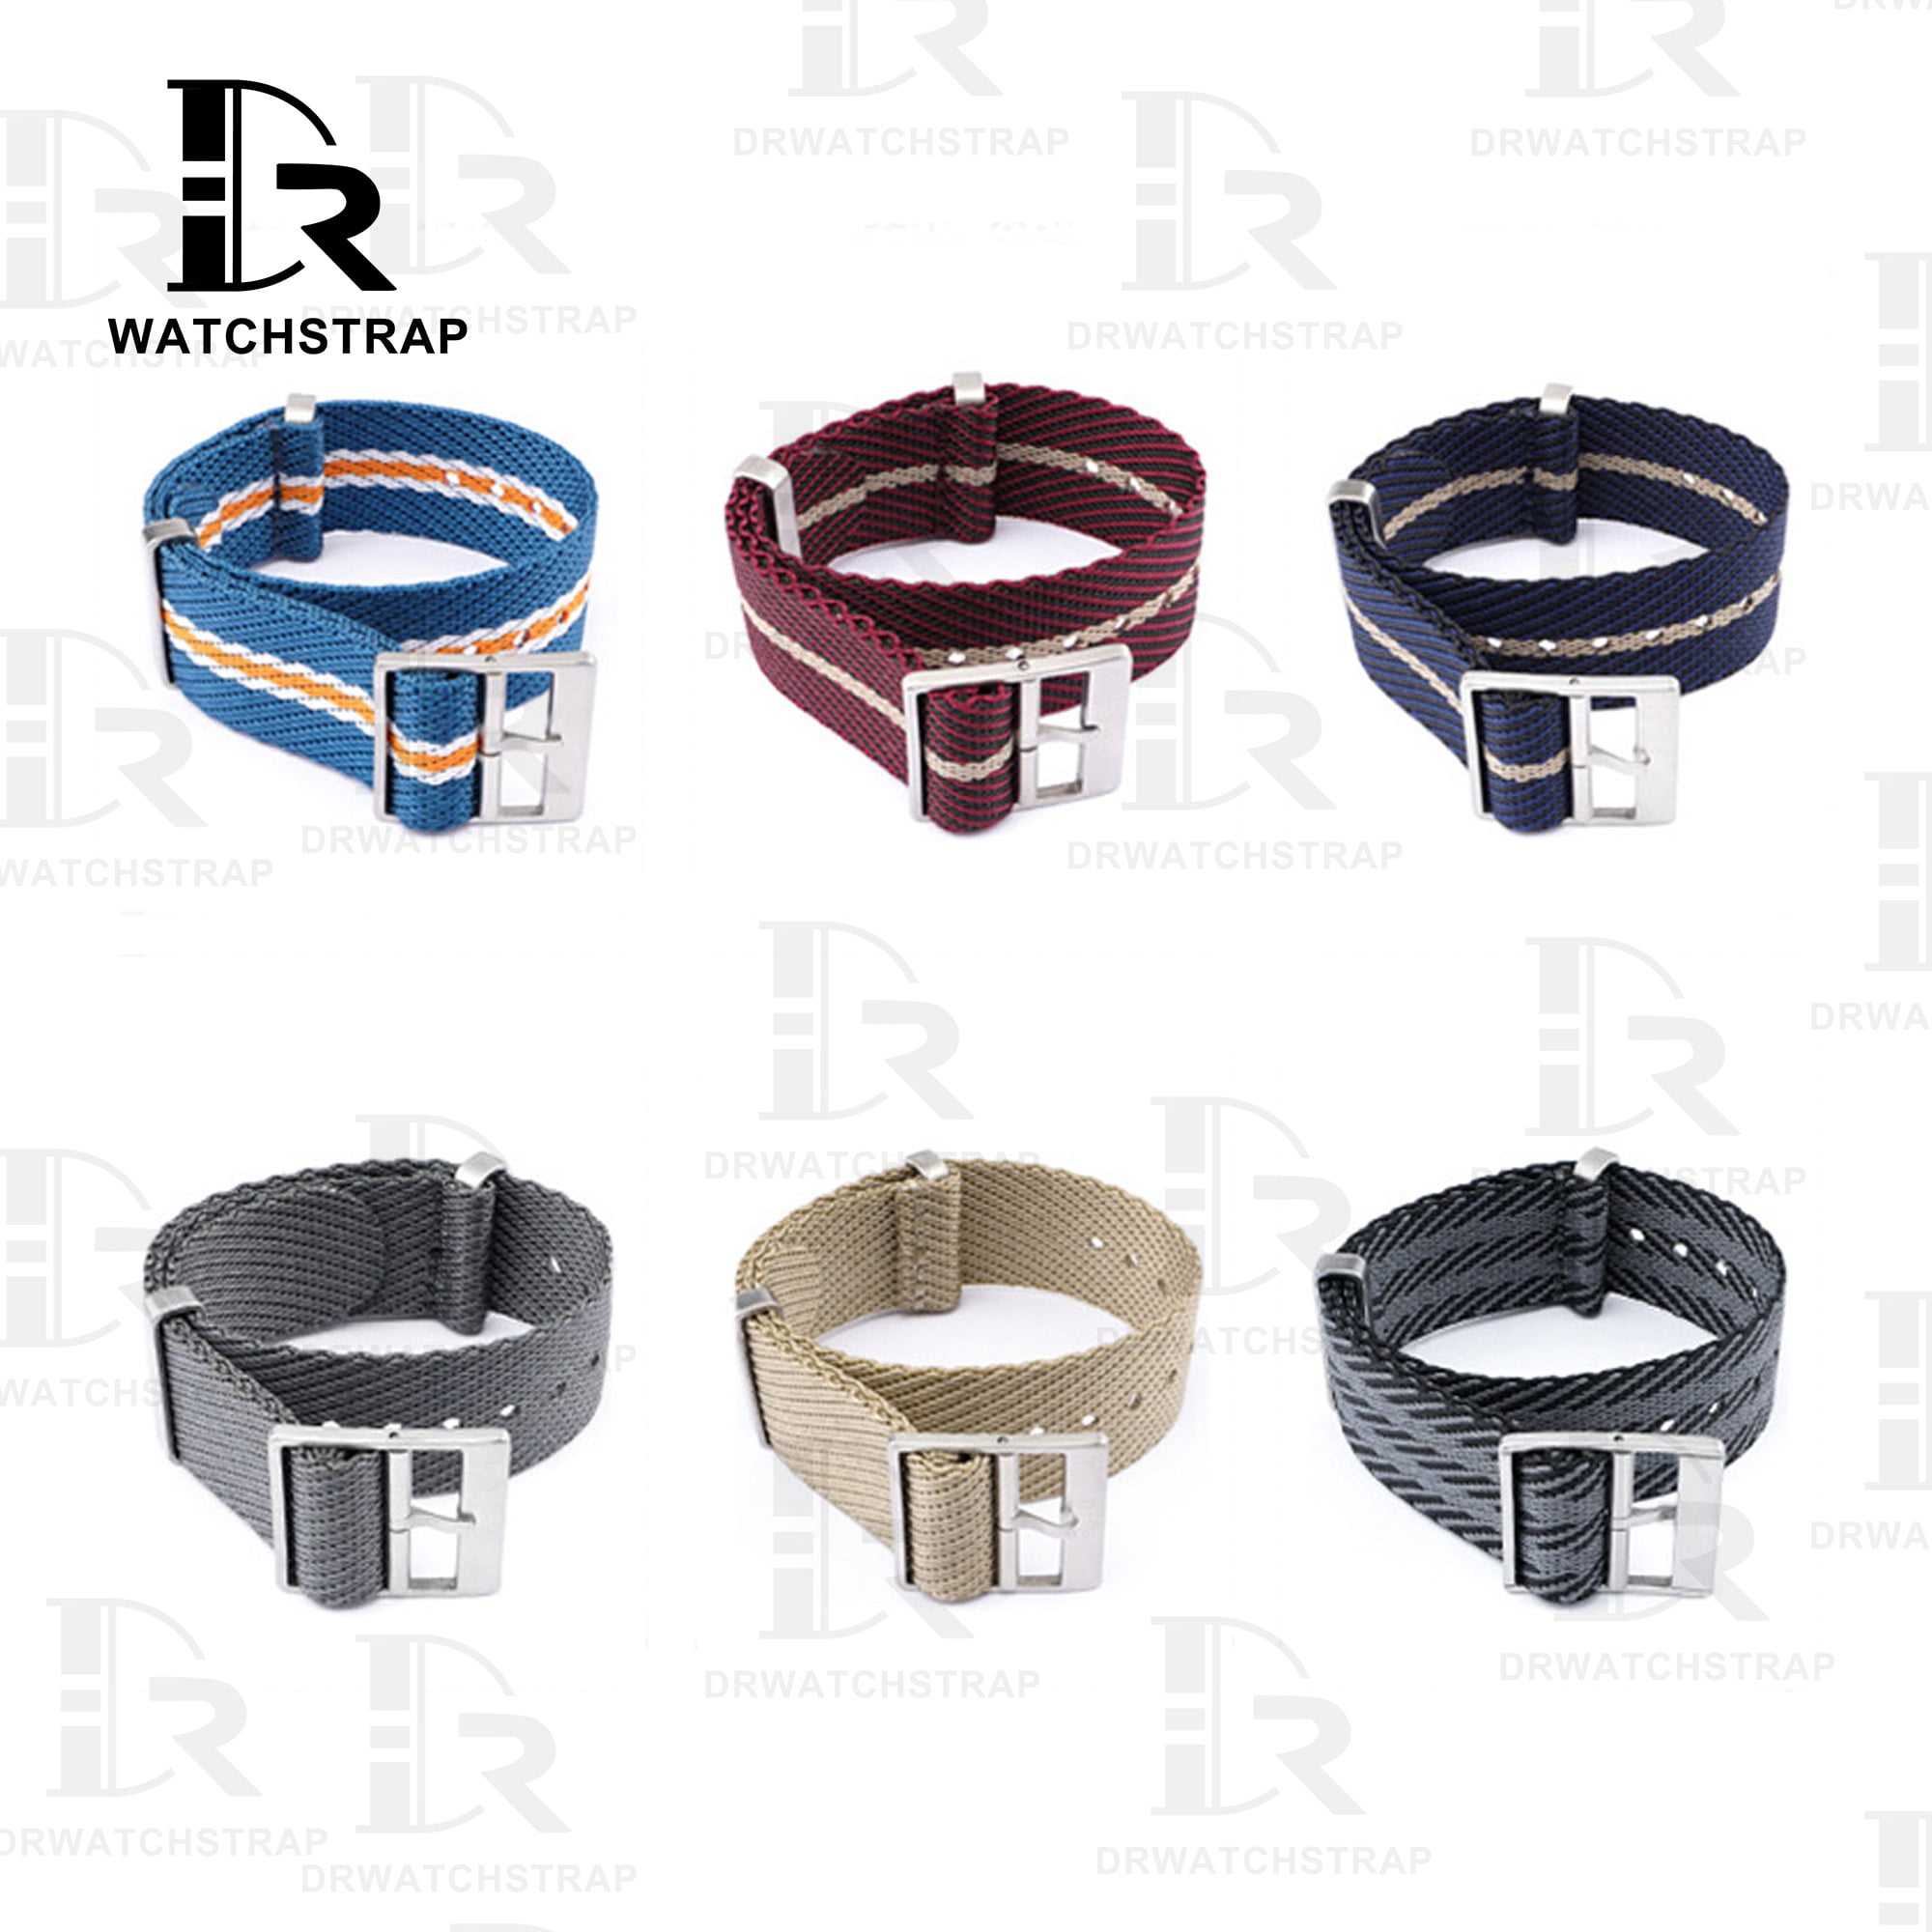 Buy Replacement Blancpain x Swatch watchbands 20mm Blancpain nato strap (4)